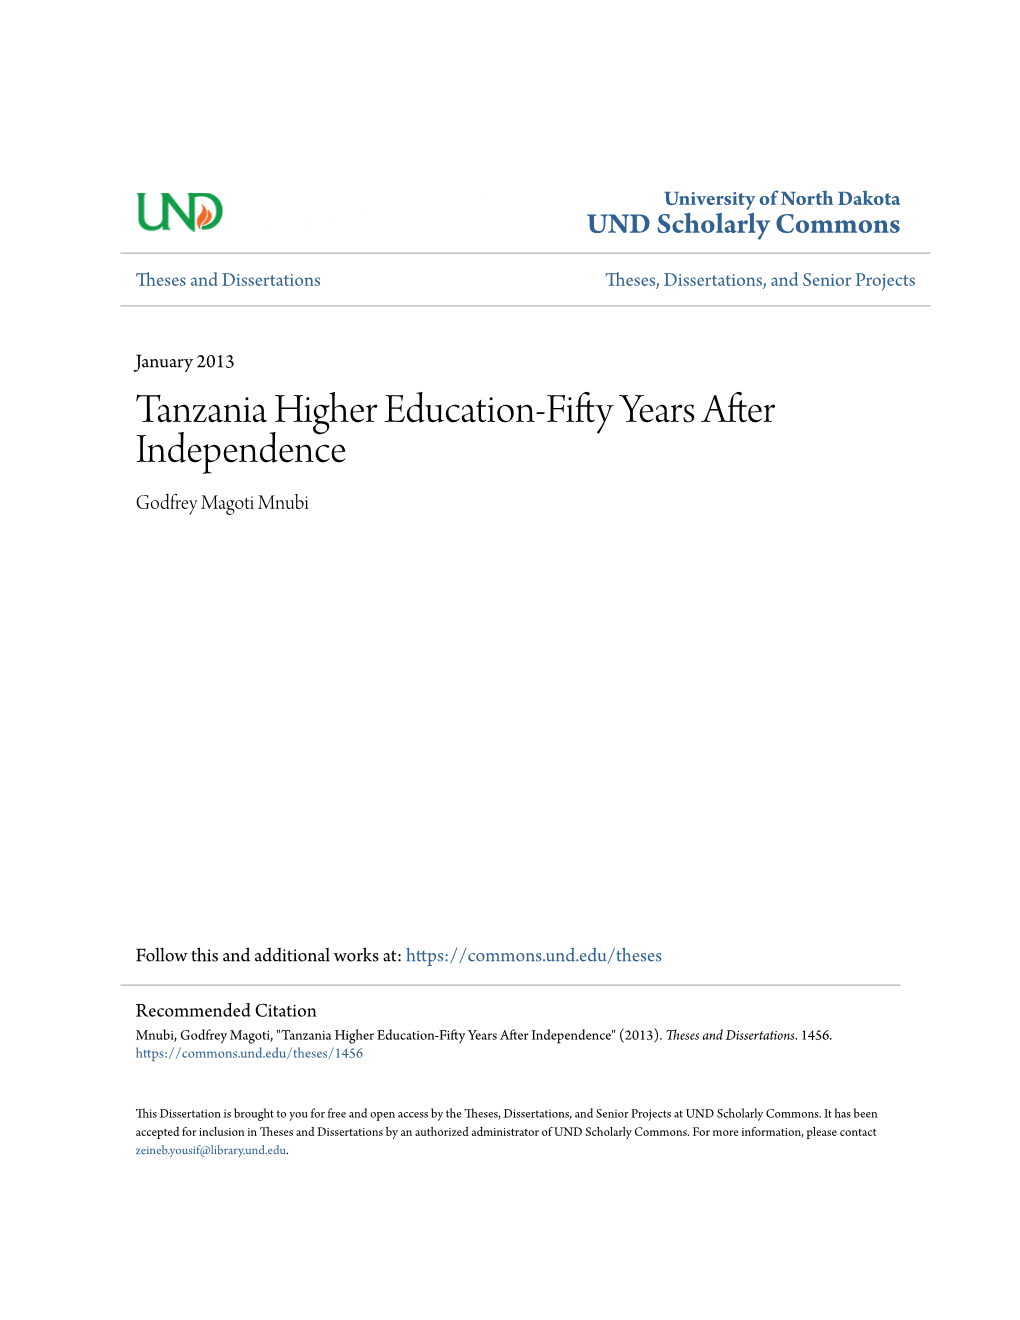 Tanzania Higher Education-Fifty Years After Independence Godfrey Magoti Mnubi